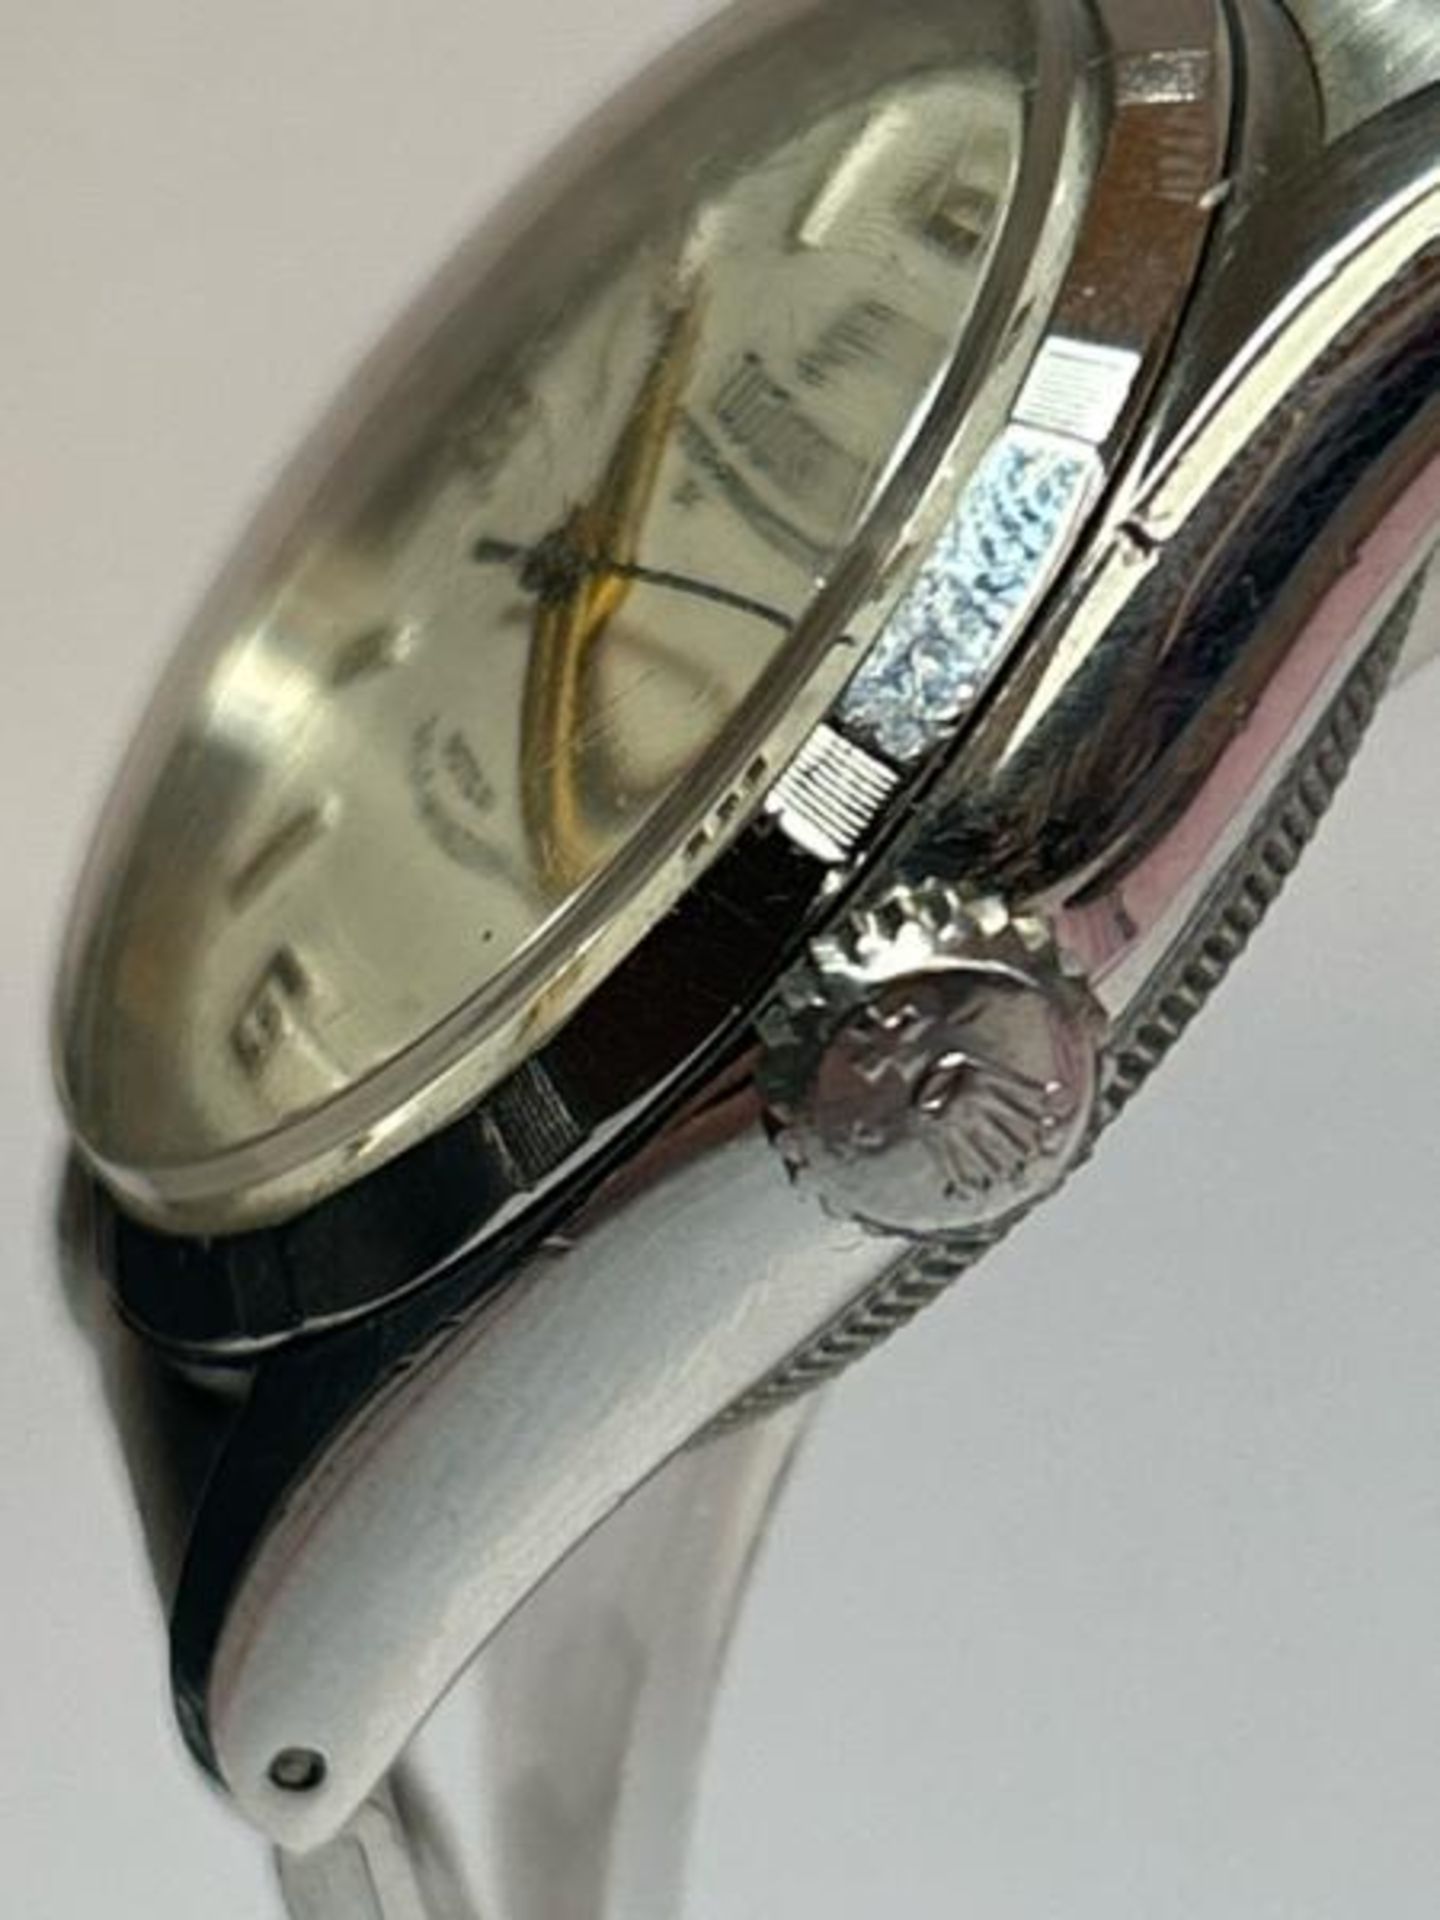 Tudor Oyster-Prince stainless steel perpetual gents watch no. 7909 152986, good condition with suede - Image 2 of 6